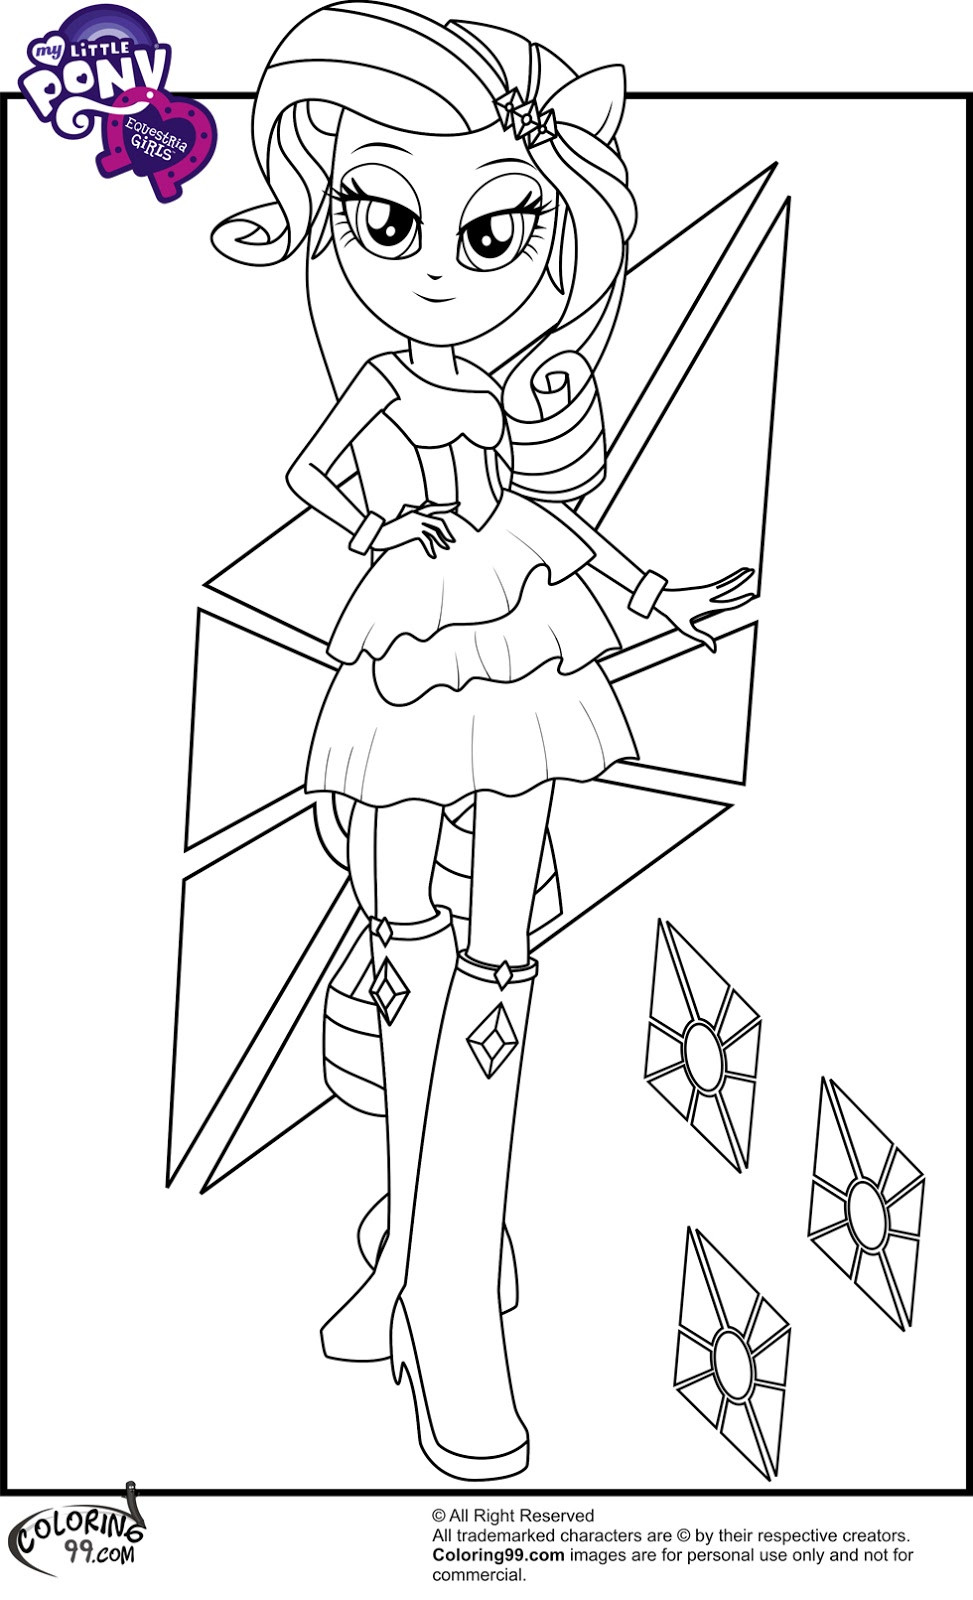 Mlp Equestria Girls Coloring Pages
 My Little Pony Equestria Girls Coloring Pages